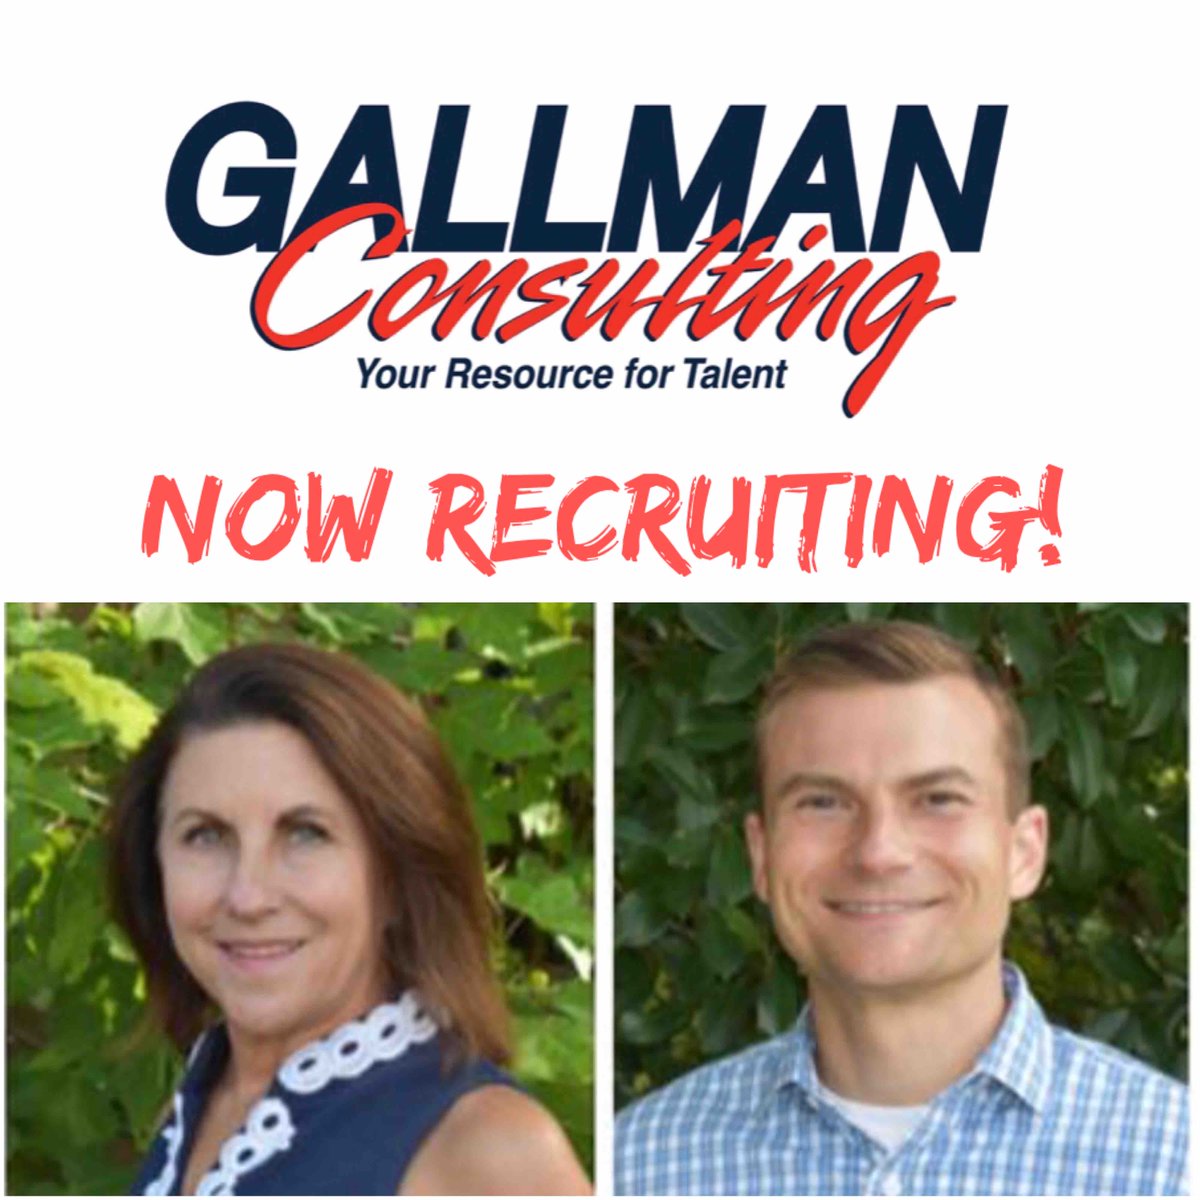 Georgette and Smith are #nowrecruiting:
👉Estimator-Heavy Civil
👉Project Manager-Civil Site Development
👉Project Engineer
👉Regional Engineering Manager
👉Retail Project Superintendent
👉Mechanical Engineer Team Leader
👉And MORE!
gallman-consulting.com/jobs/#!/search…  #gallmantalent #hiring